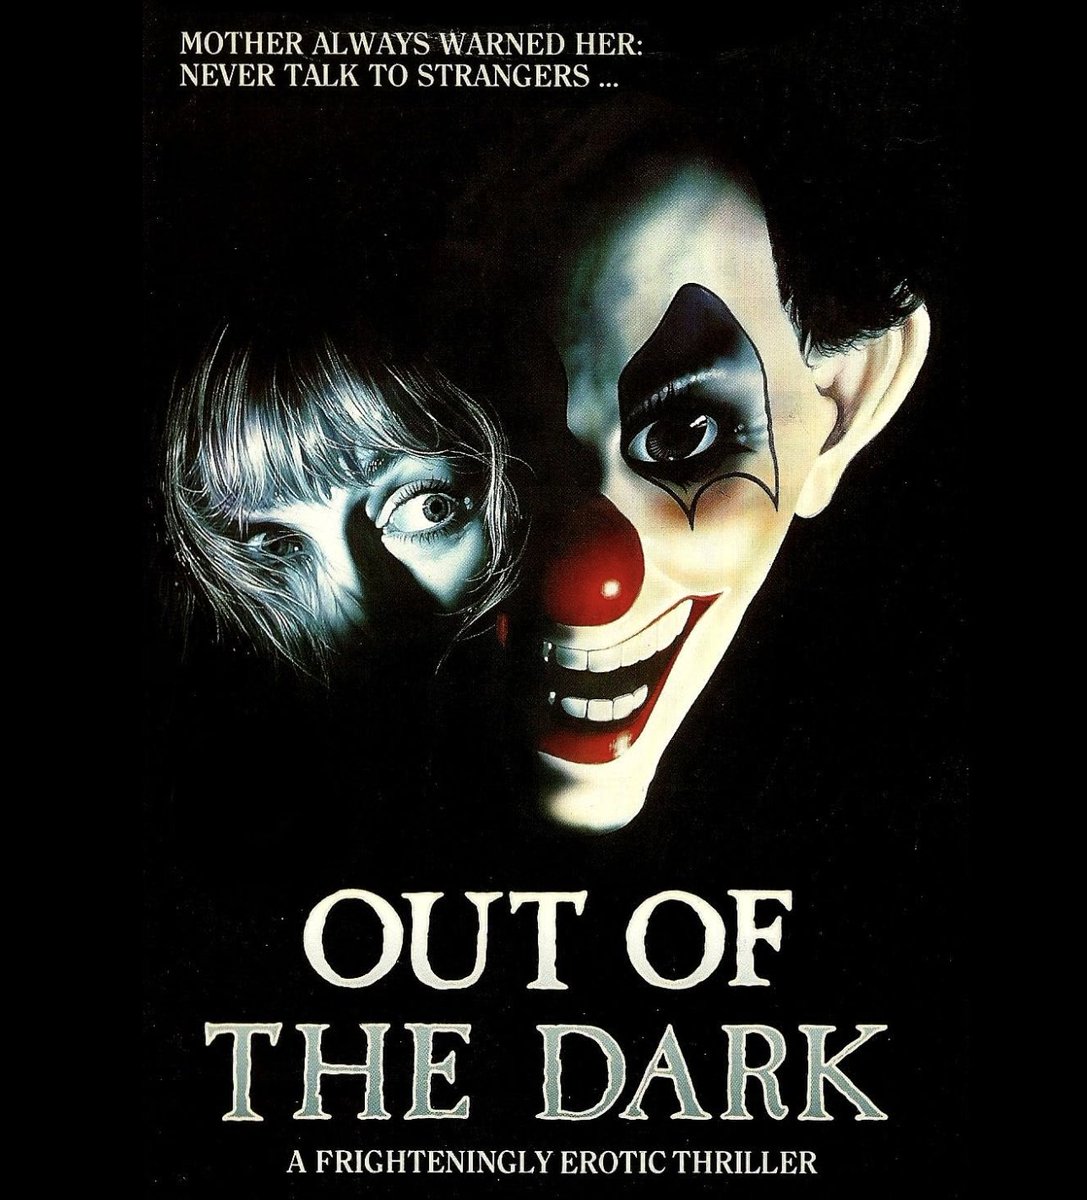 24. OUT OF THE DARK ('88) We conclude our mini Karen Black film fest w/ Karen as the owner of a phone sex line whose employees are stalked by a scary clown-masked killer. Highlights incl Divine & Paul Bartel in bit parts & some quality male lead shirtlessness #31HorrorFilms31Days